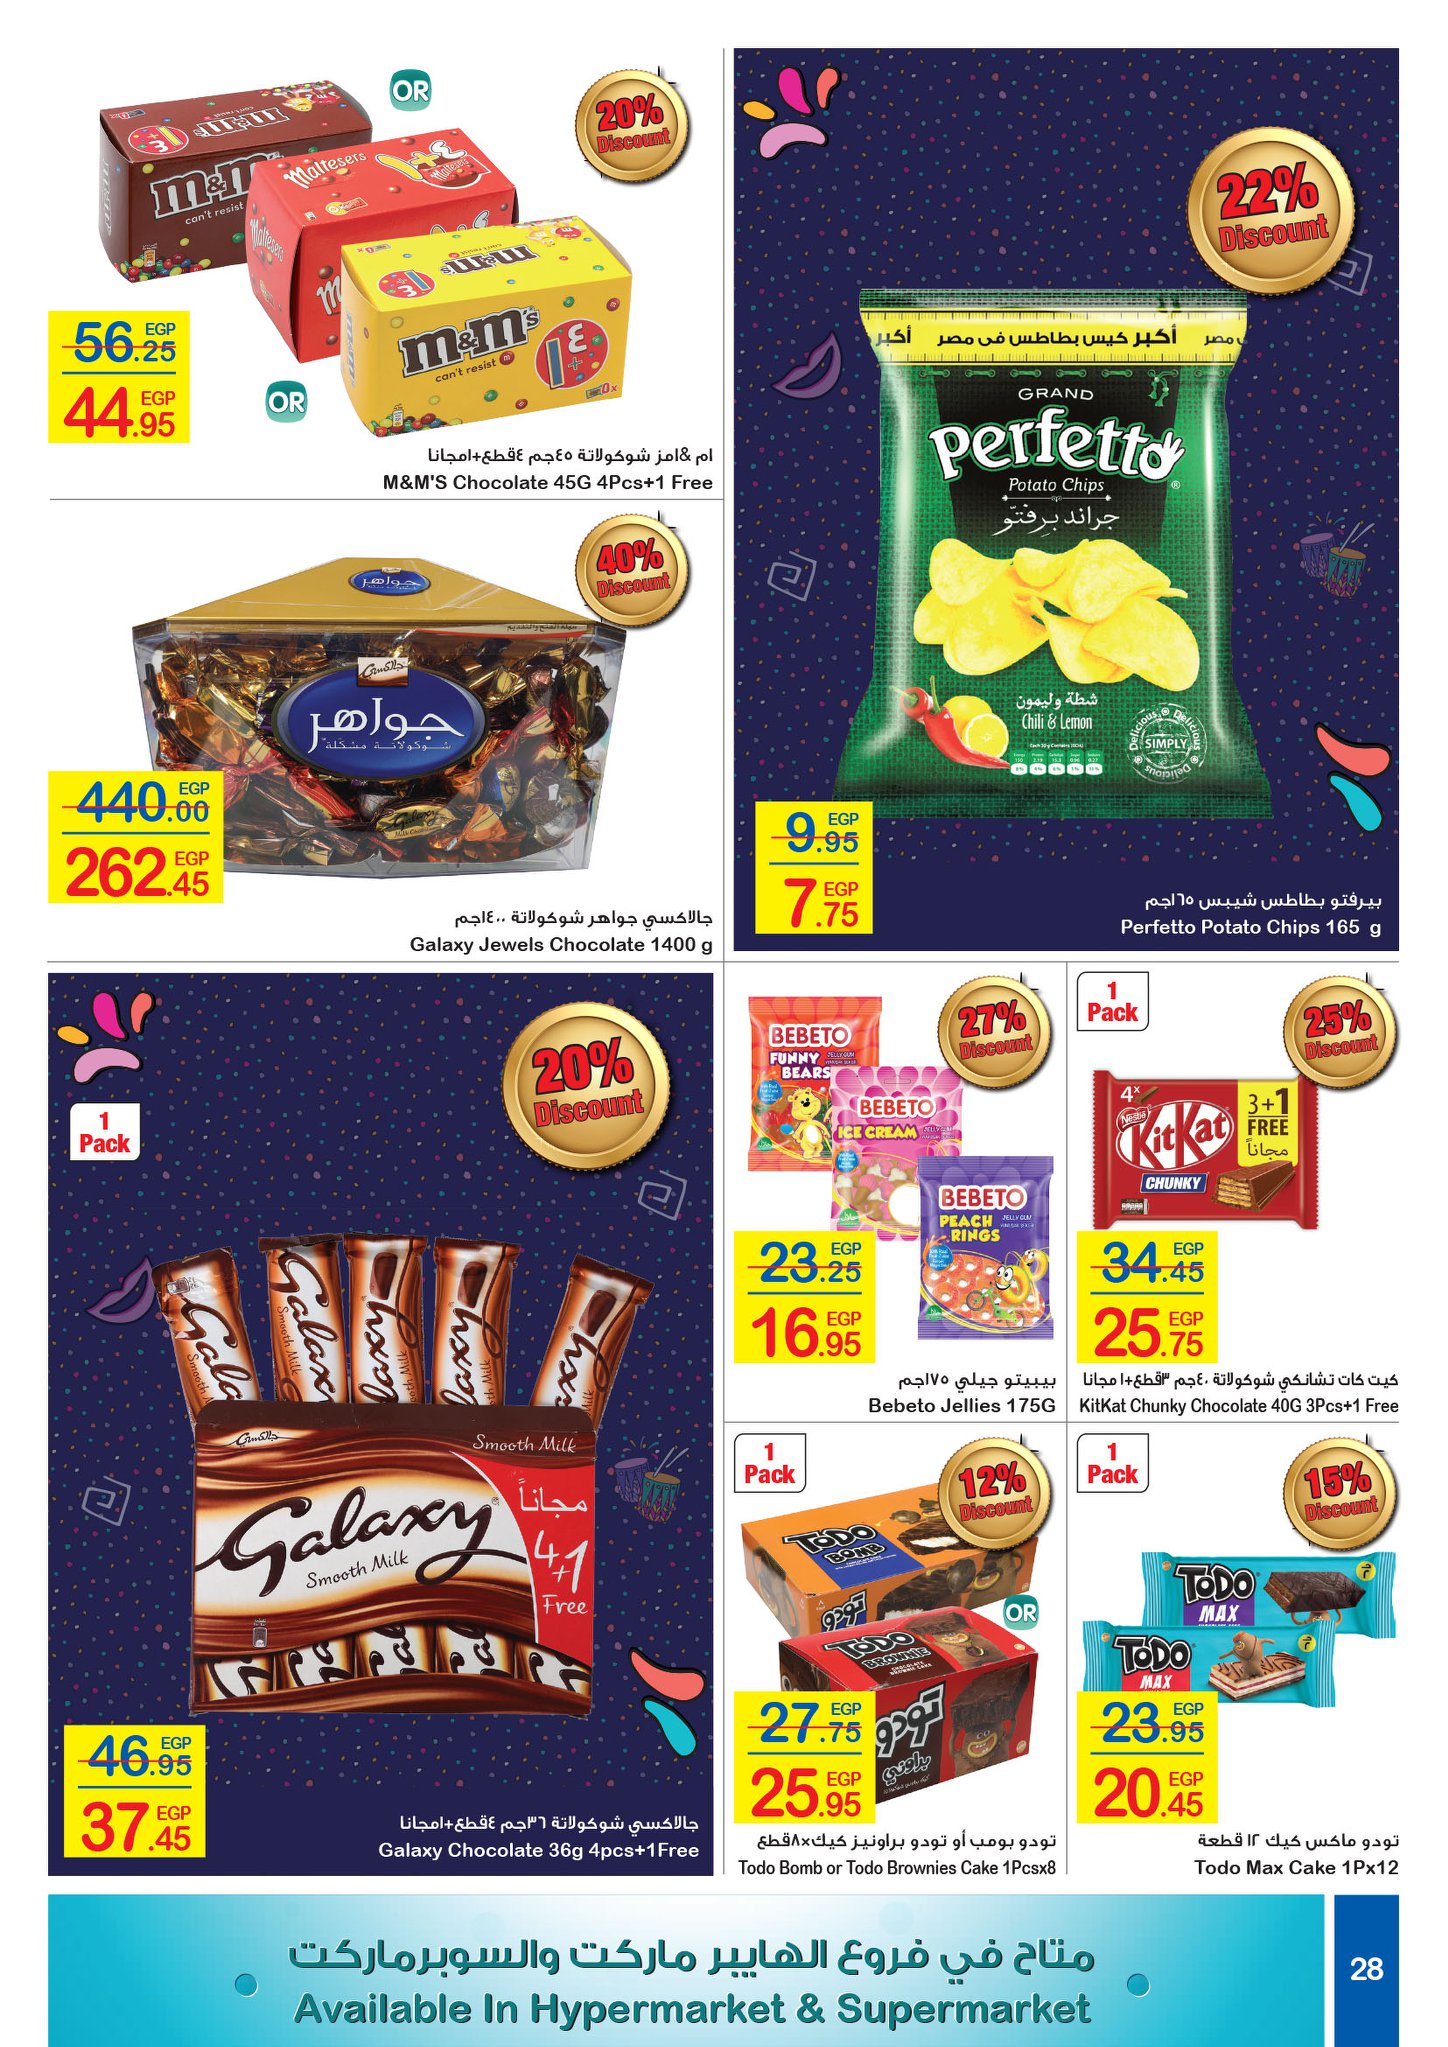 Carrefour Flyer from 16/7 till 27/7 | Carrefour Egypt 28